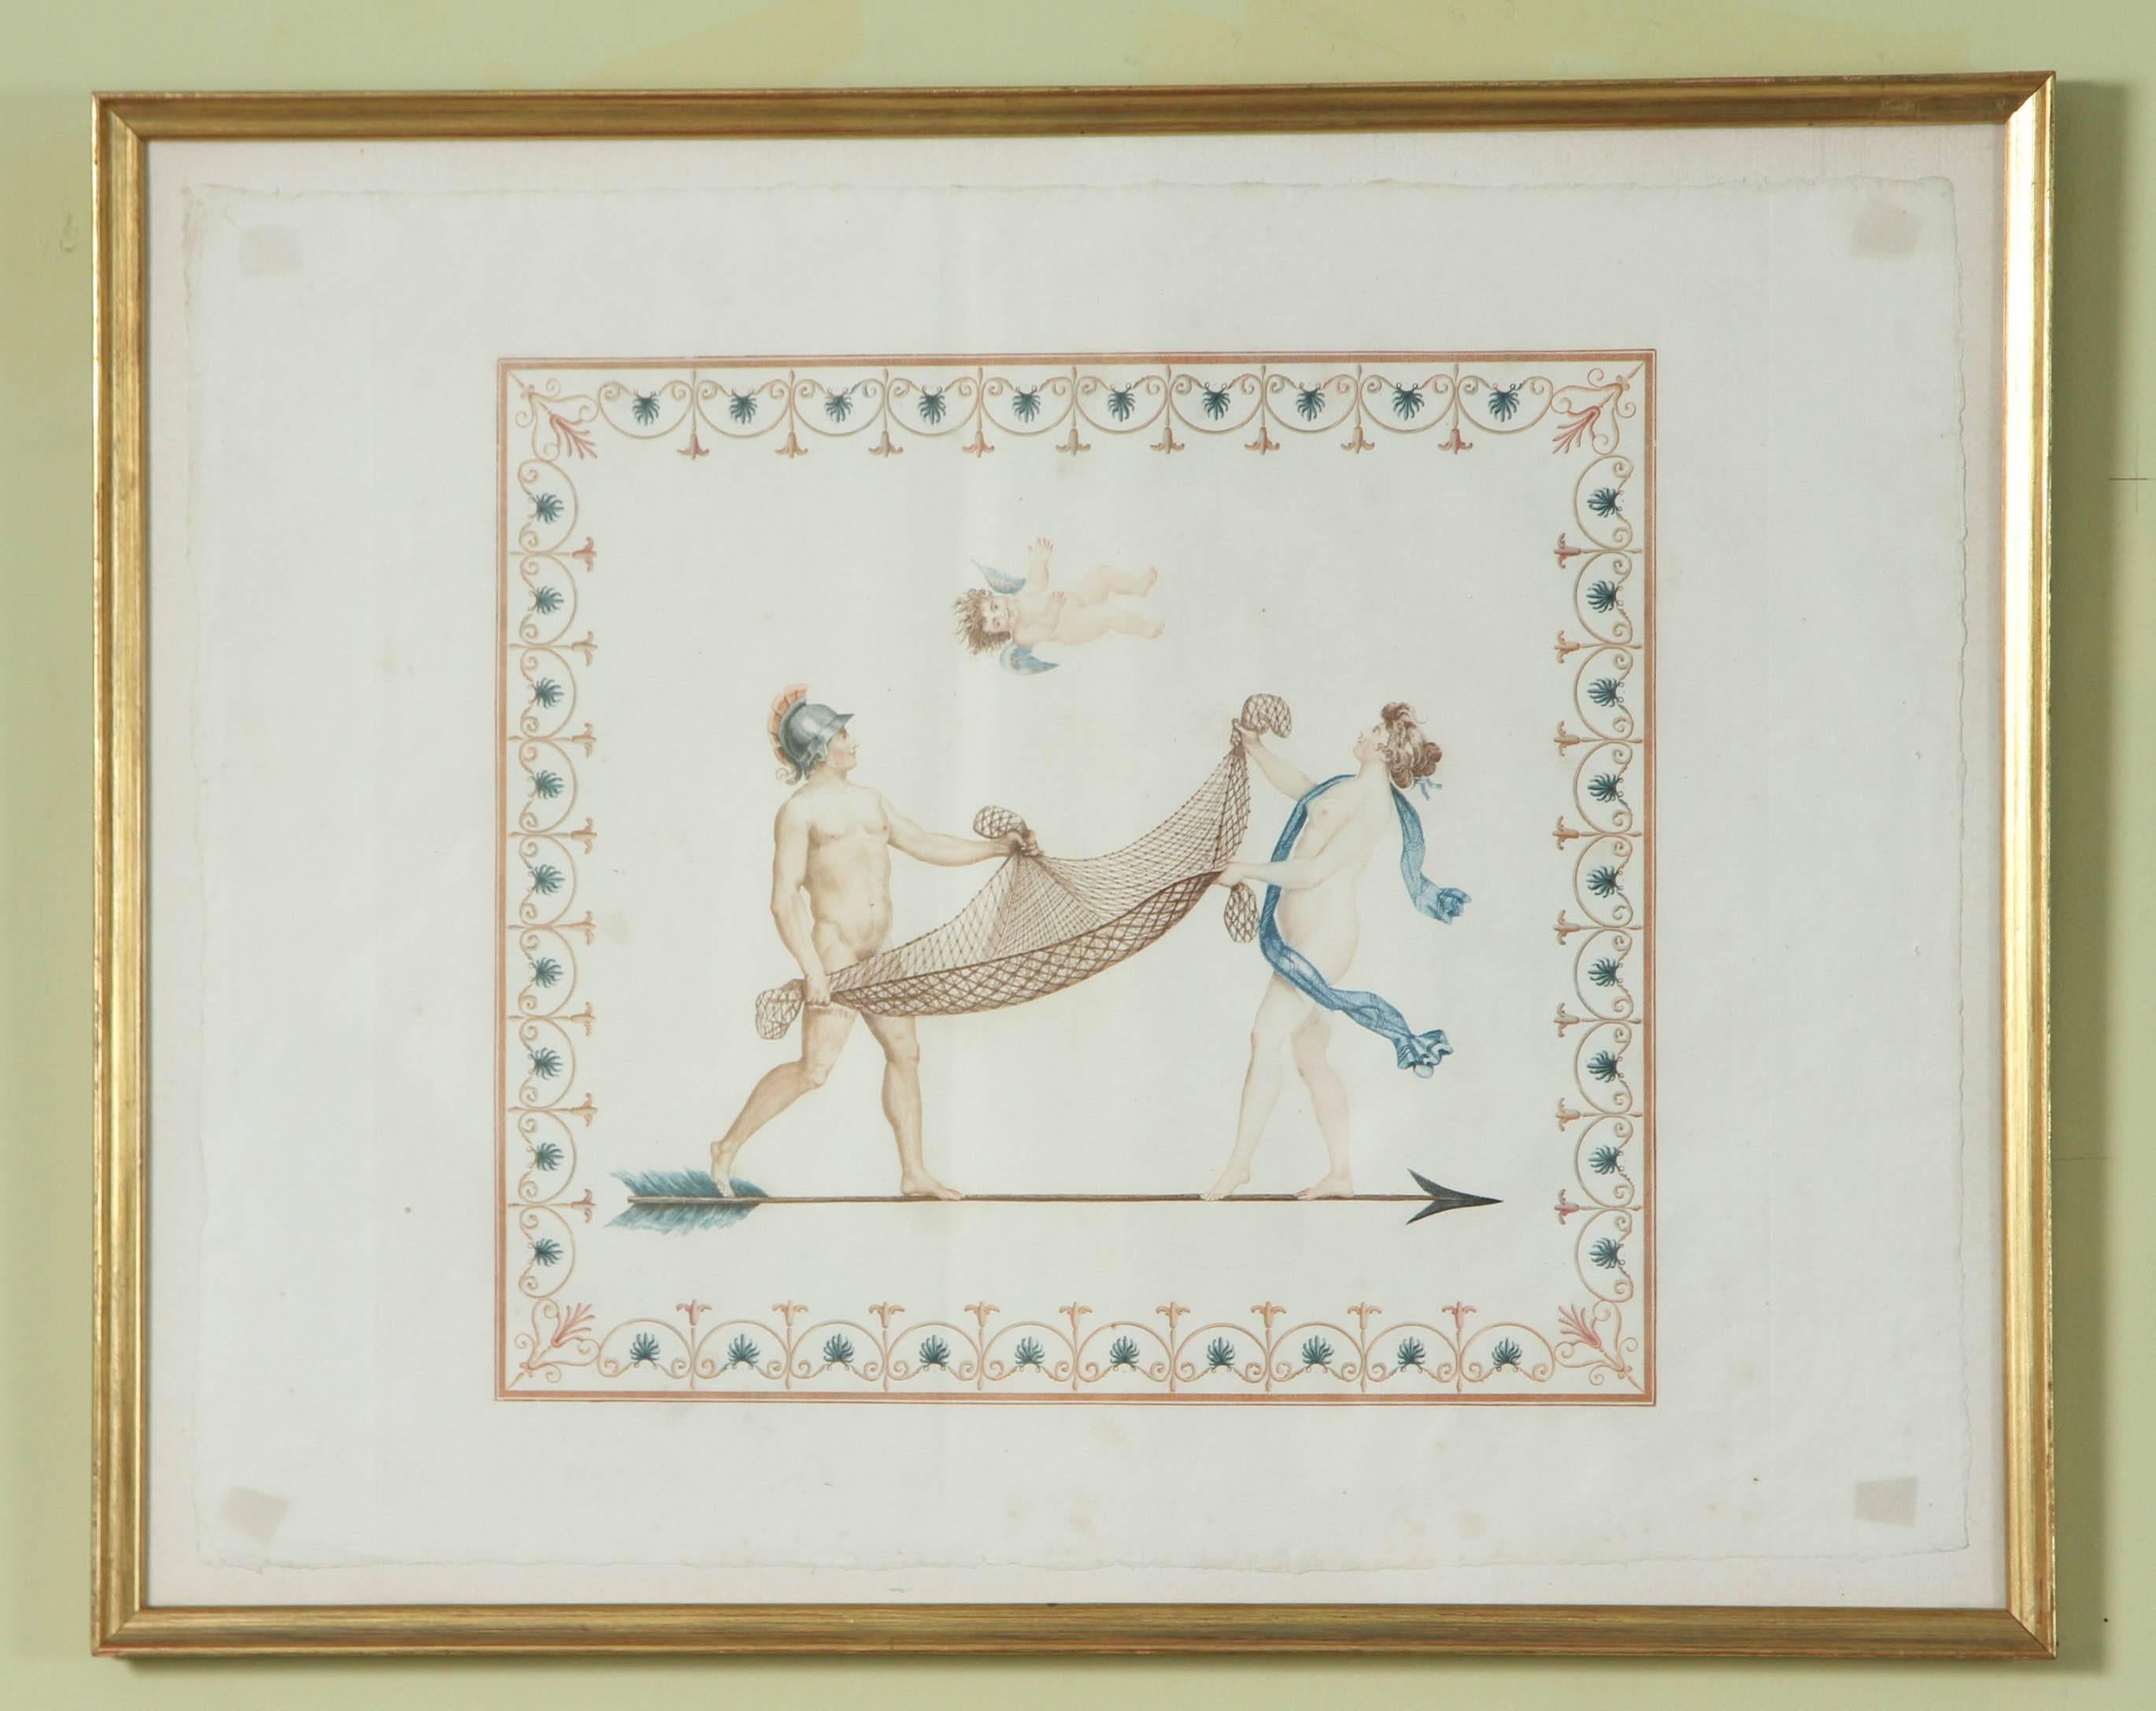 A set of six French color-printed neoclassical engravings, circa 1795. The color printing process is called "a la poupee." The copper plate is applied with various colored inks by hand with cotton "dobs" (poupee in French) and